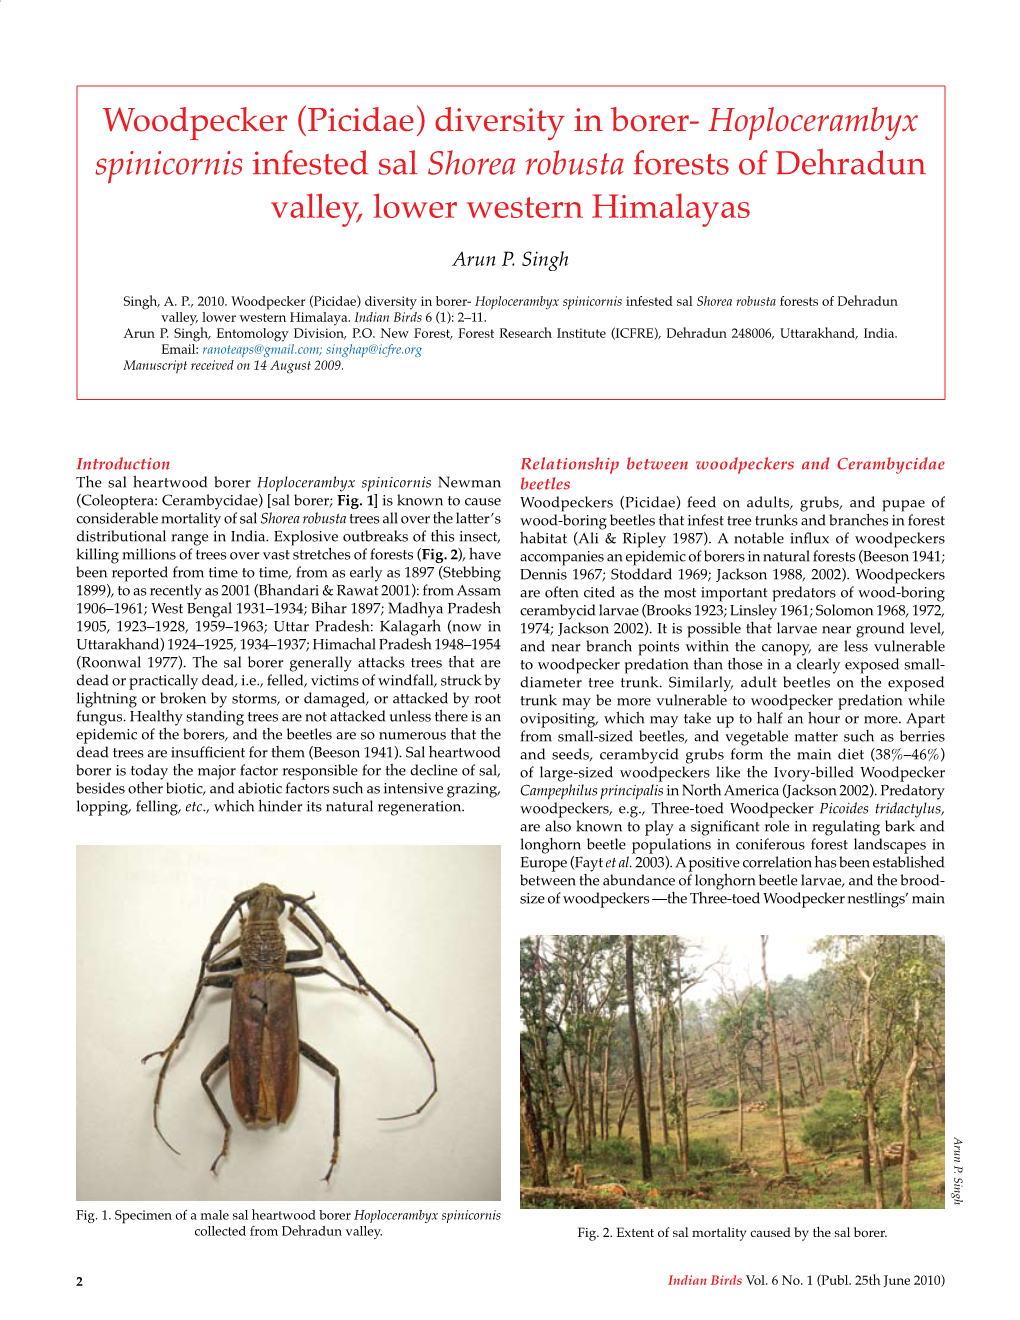 Woodpecker (Picidae) Diversity in Borer- Hoplocerambyx Spinicornis Infested Sal Shorea Robusta Forests of Dehradun Valley, Lower Western Himalayas